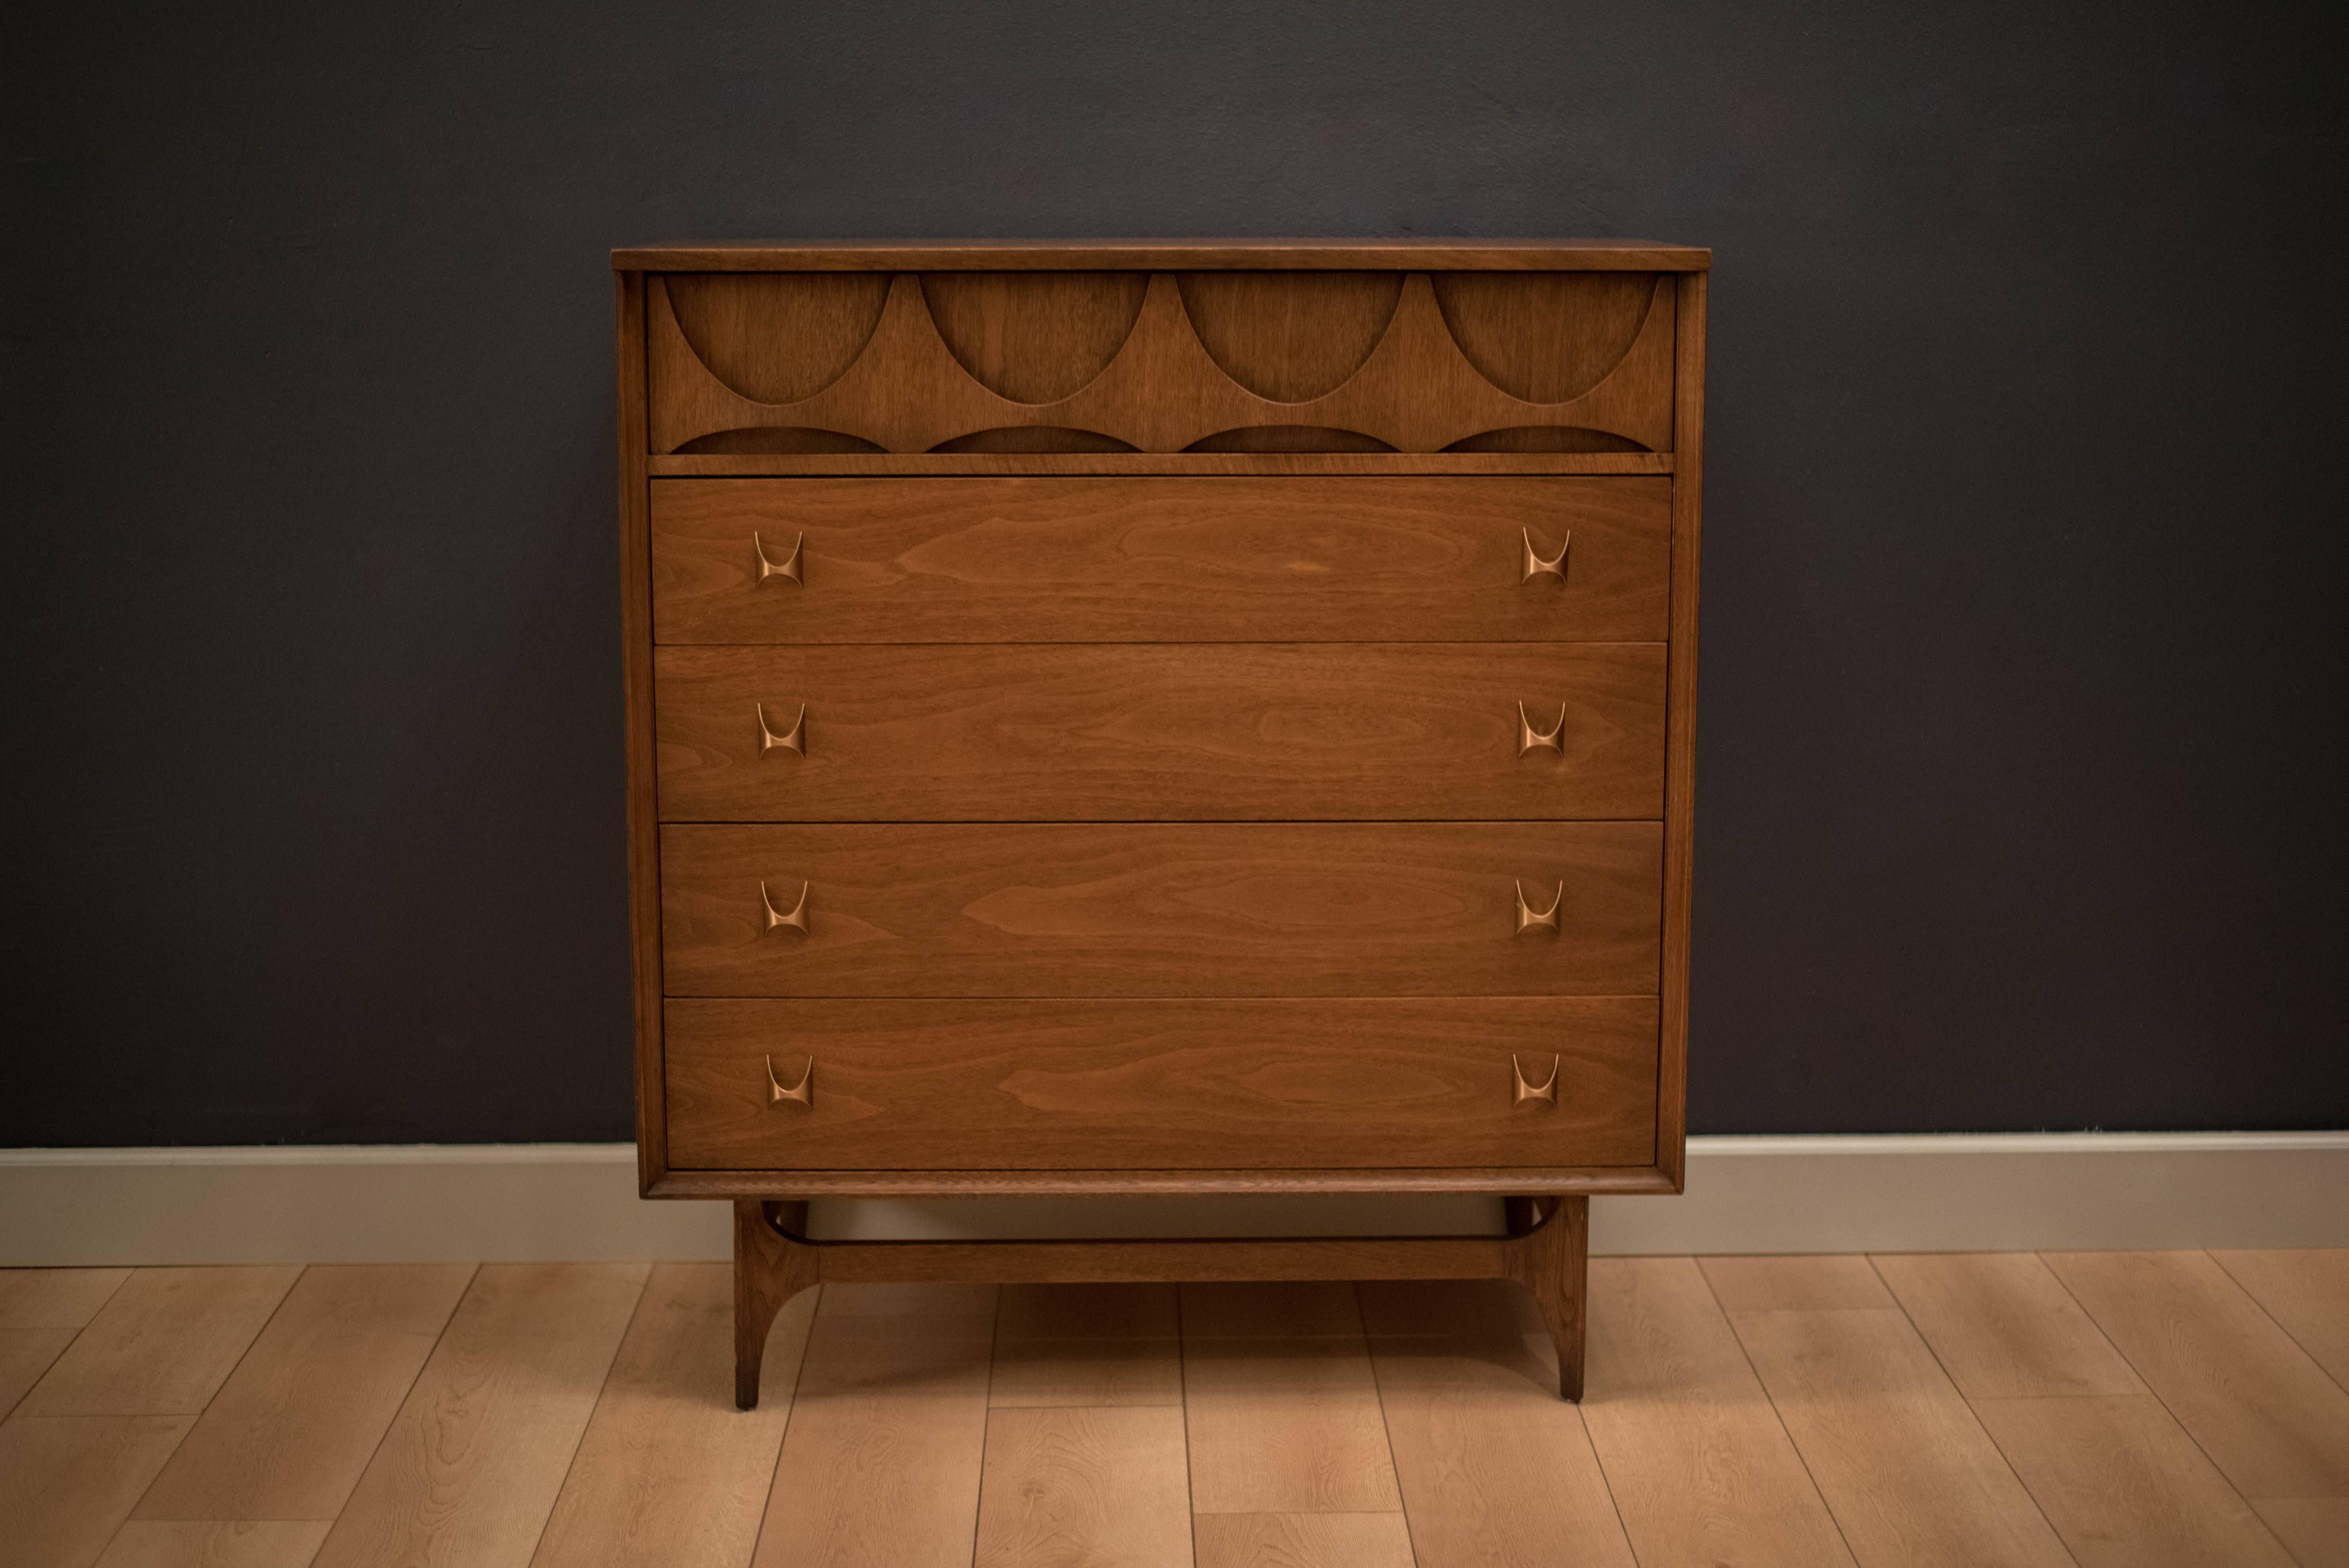 Mid-Century Brasilia highboy dresser manufactured by Broyhill Premier, circa 1960s. This piece includes five spacious drawers and is accessorized with the line's signature brass handles.

